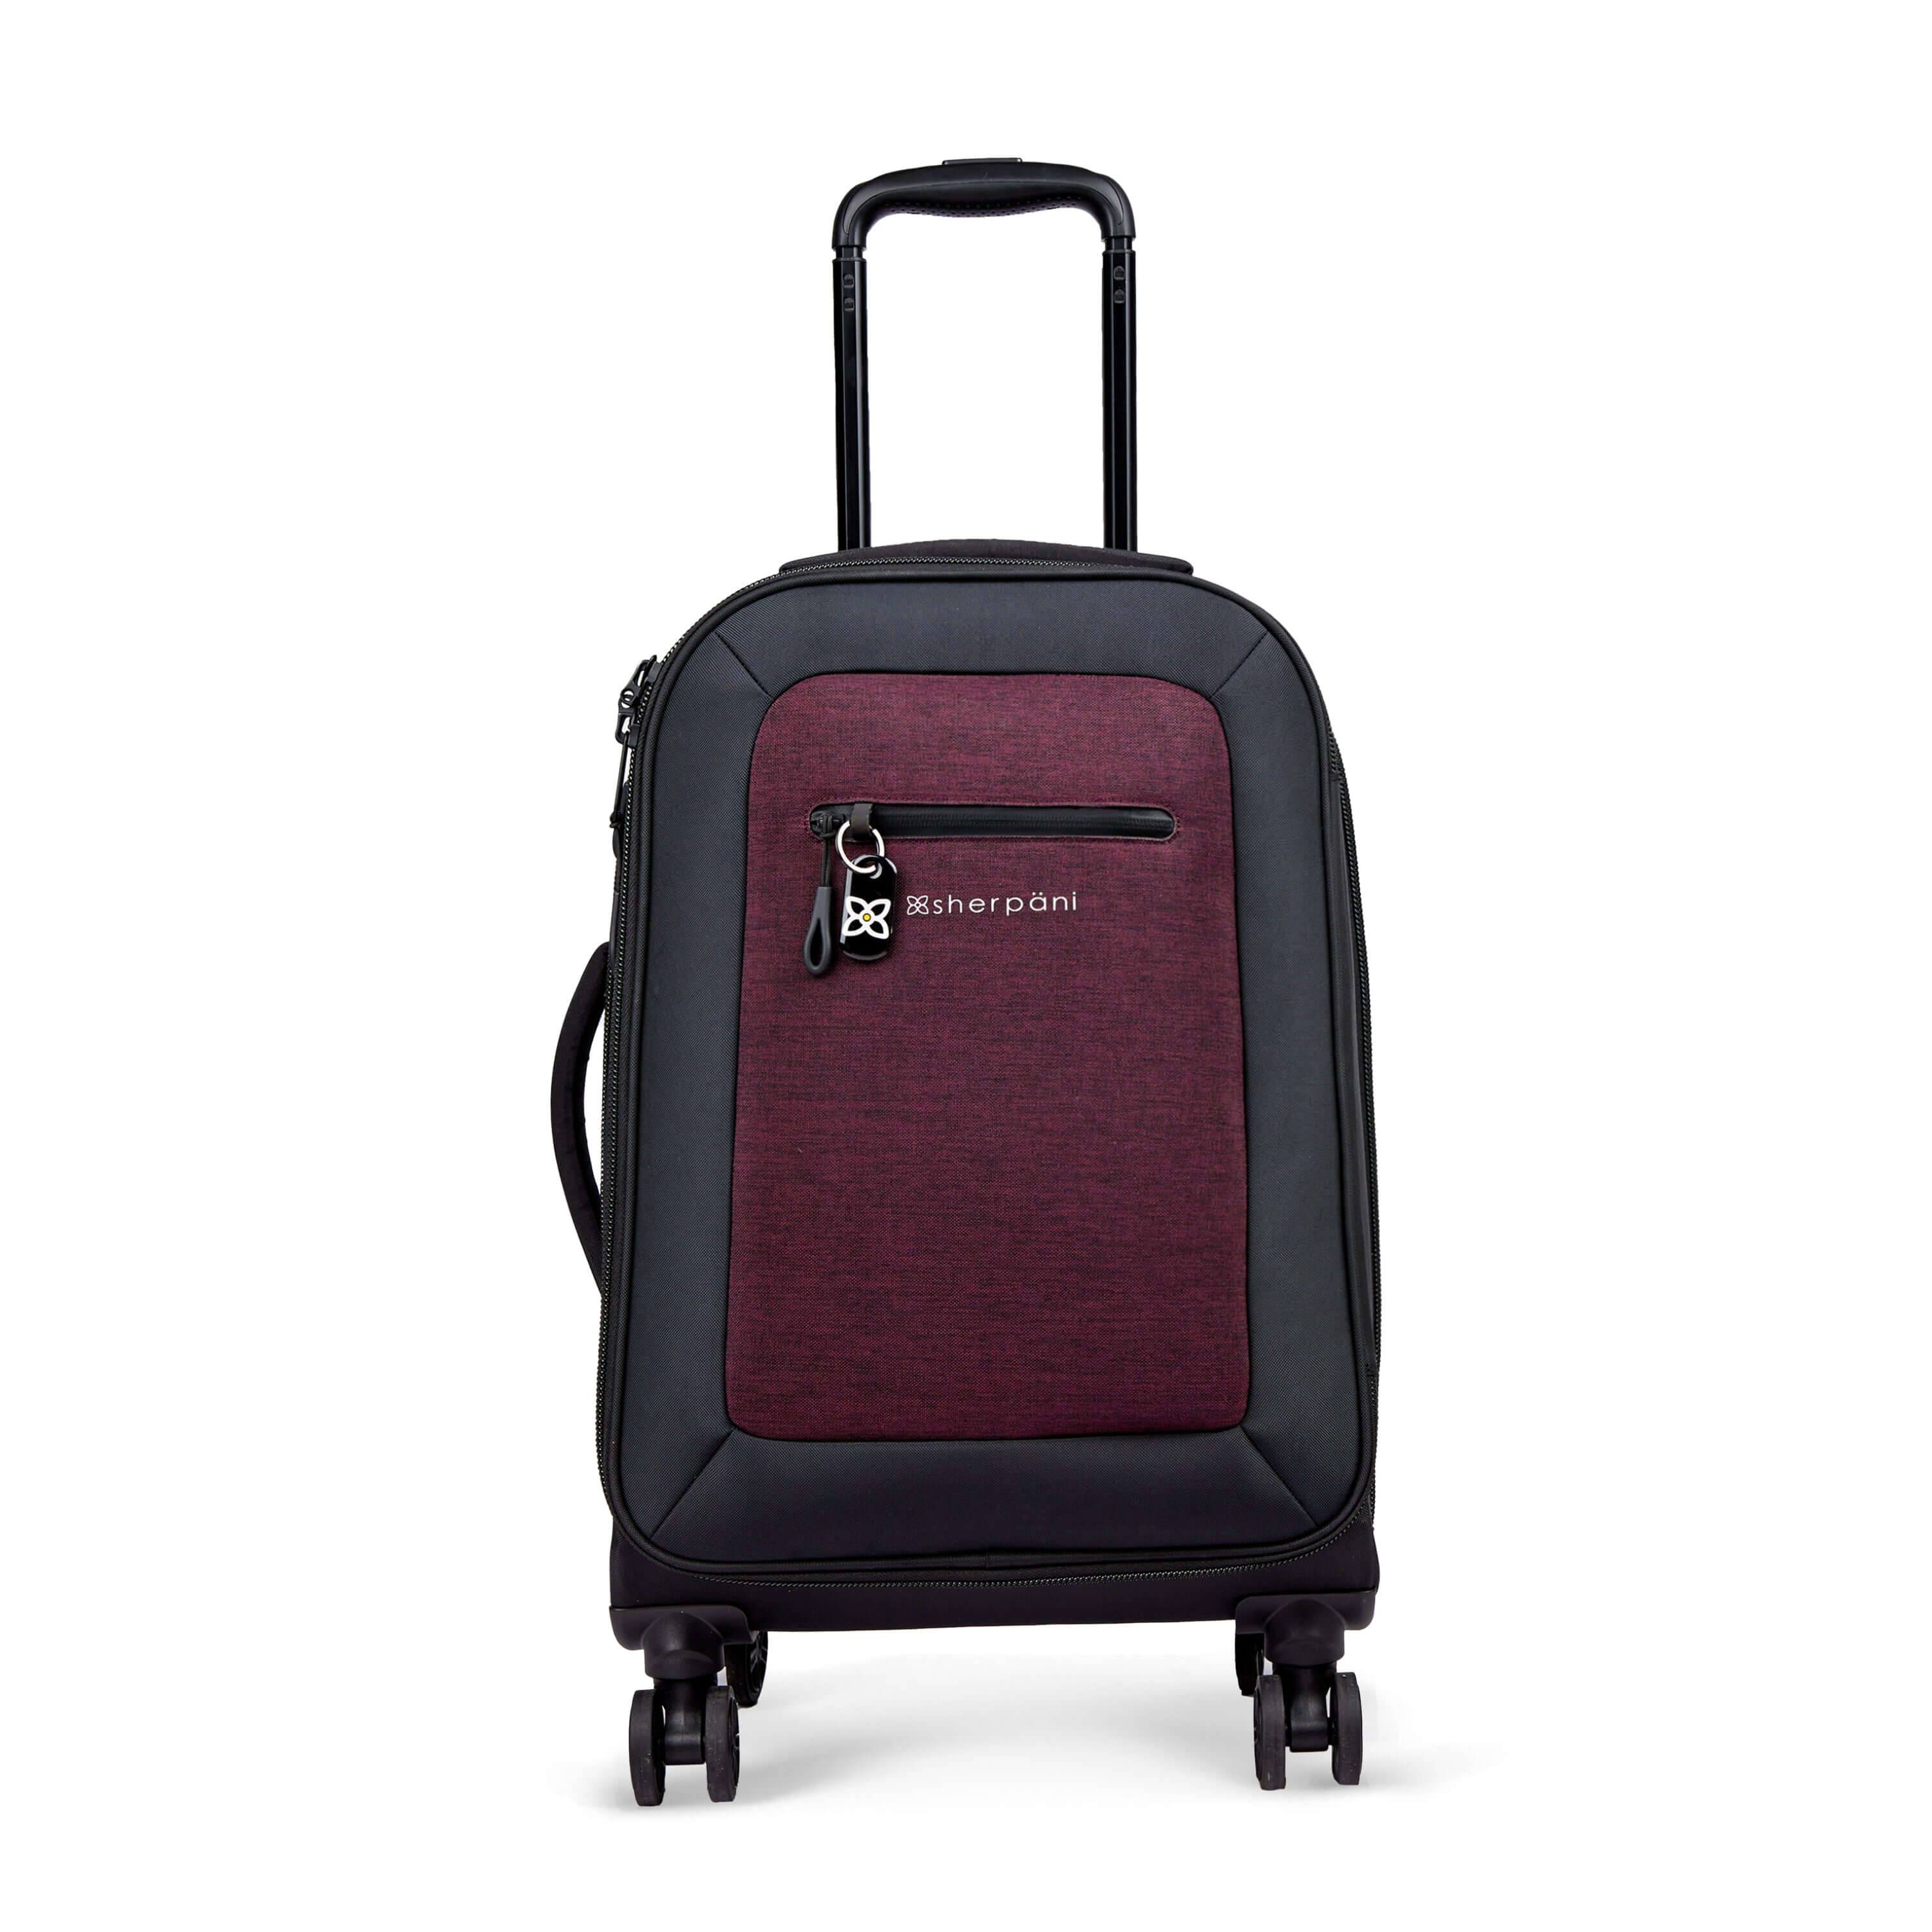 Flat front view of Sherpani's Anti-Theft luggage the Latitude in Merlot. The suitcase has a soft shell exterior made from recycled plastic bottles and features vegan leather accents in black. There is a main zipper compartment, an expansion zipper and an external pocket on the front with a locking zipper and a ReturnMe tag. On the top of the suitcase sits a retractable luggage handle. On the side sits an easy-access handle. At the bottom are four 360-degree spinner wheels for smooth rolling. 